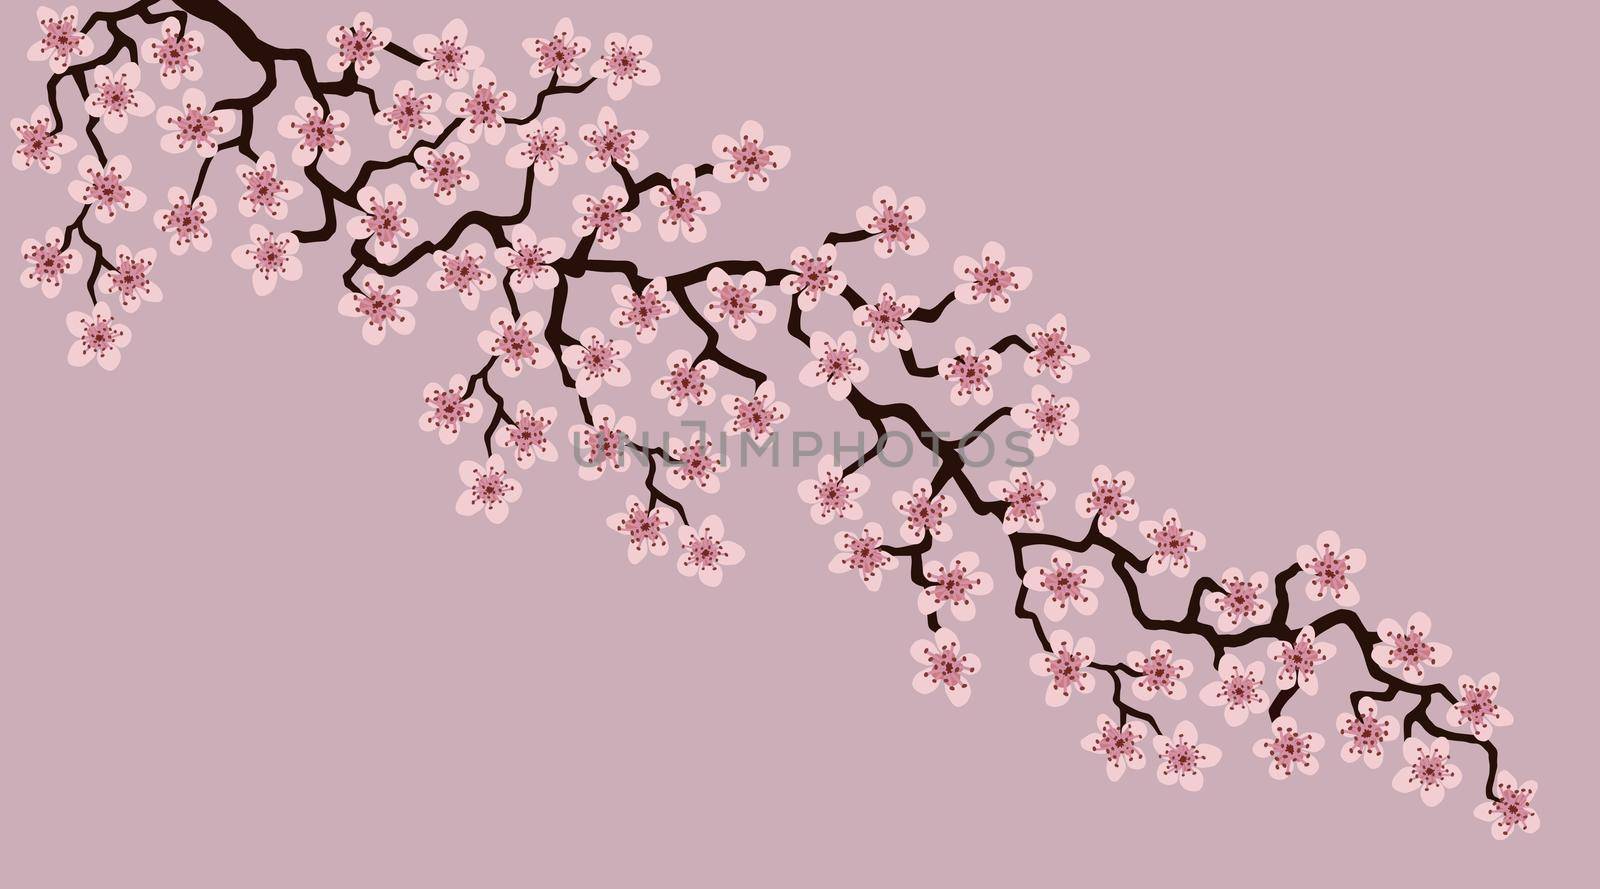 Floral greeting card with beautiful pink blossom flowers branch Sakura.Rosy brown colors Background with copy space text on Cherry Twig In Bloom.Postcard good for wedding invitation, Mother, Women day